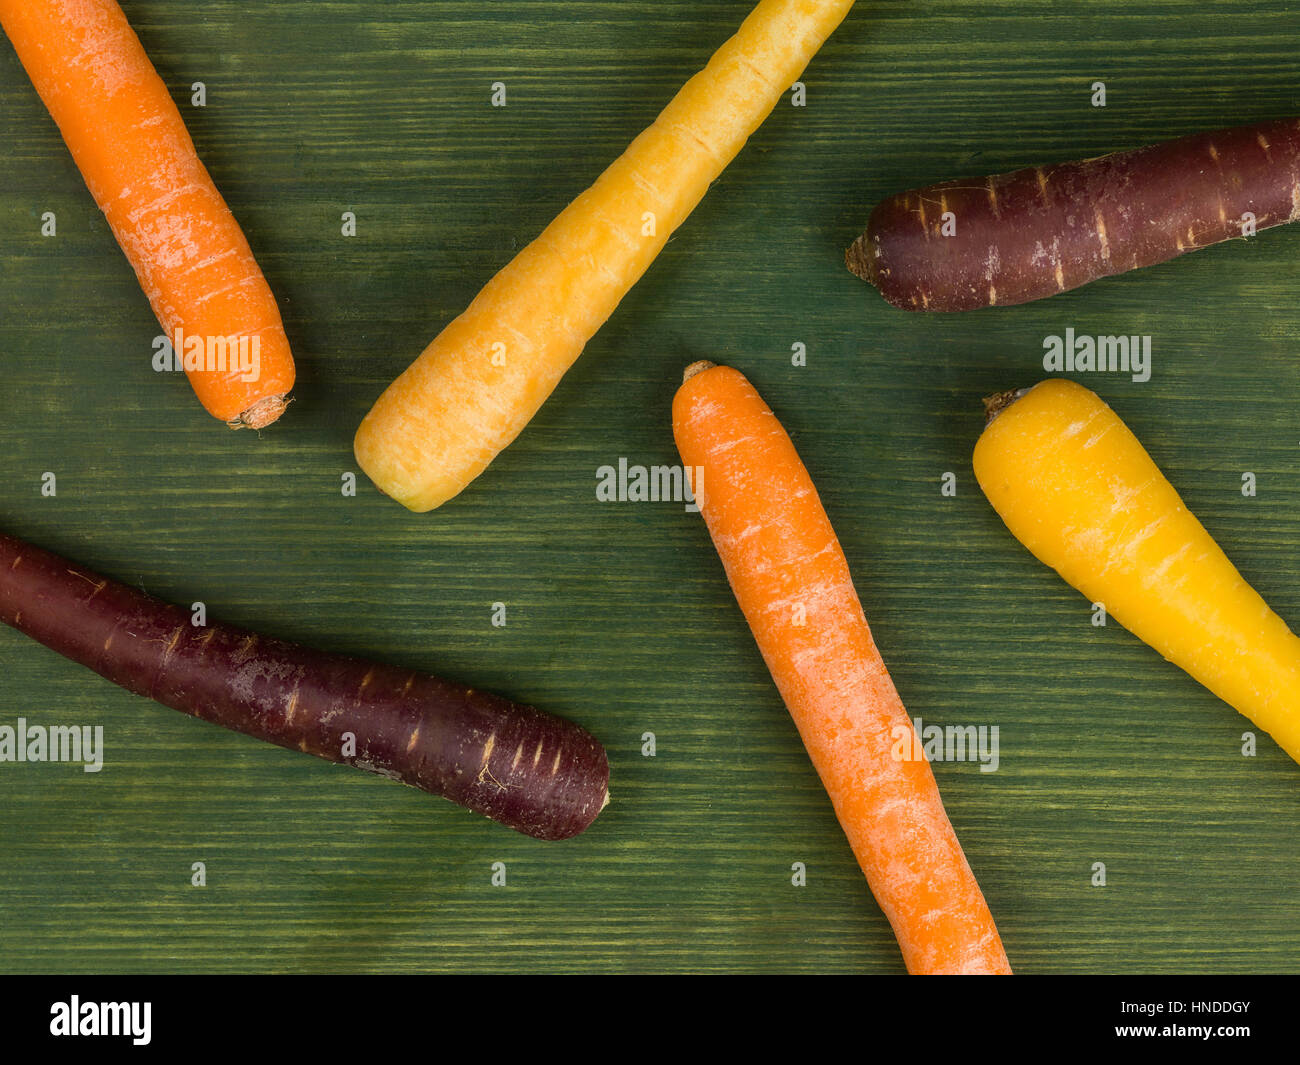 Colorful Rainbow Carrots Cooking Ingredients On A Green Background Stock Photo